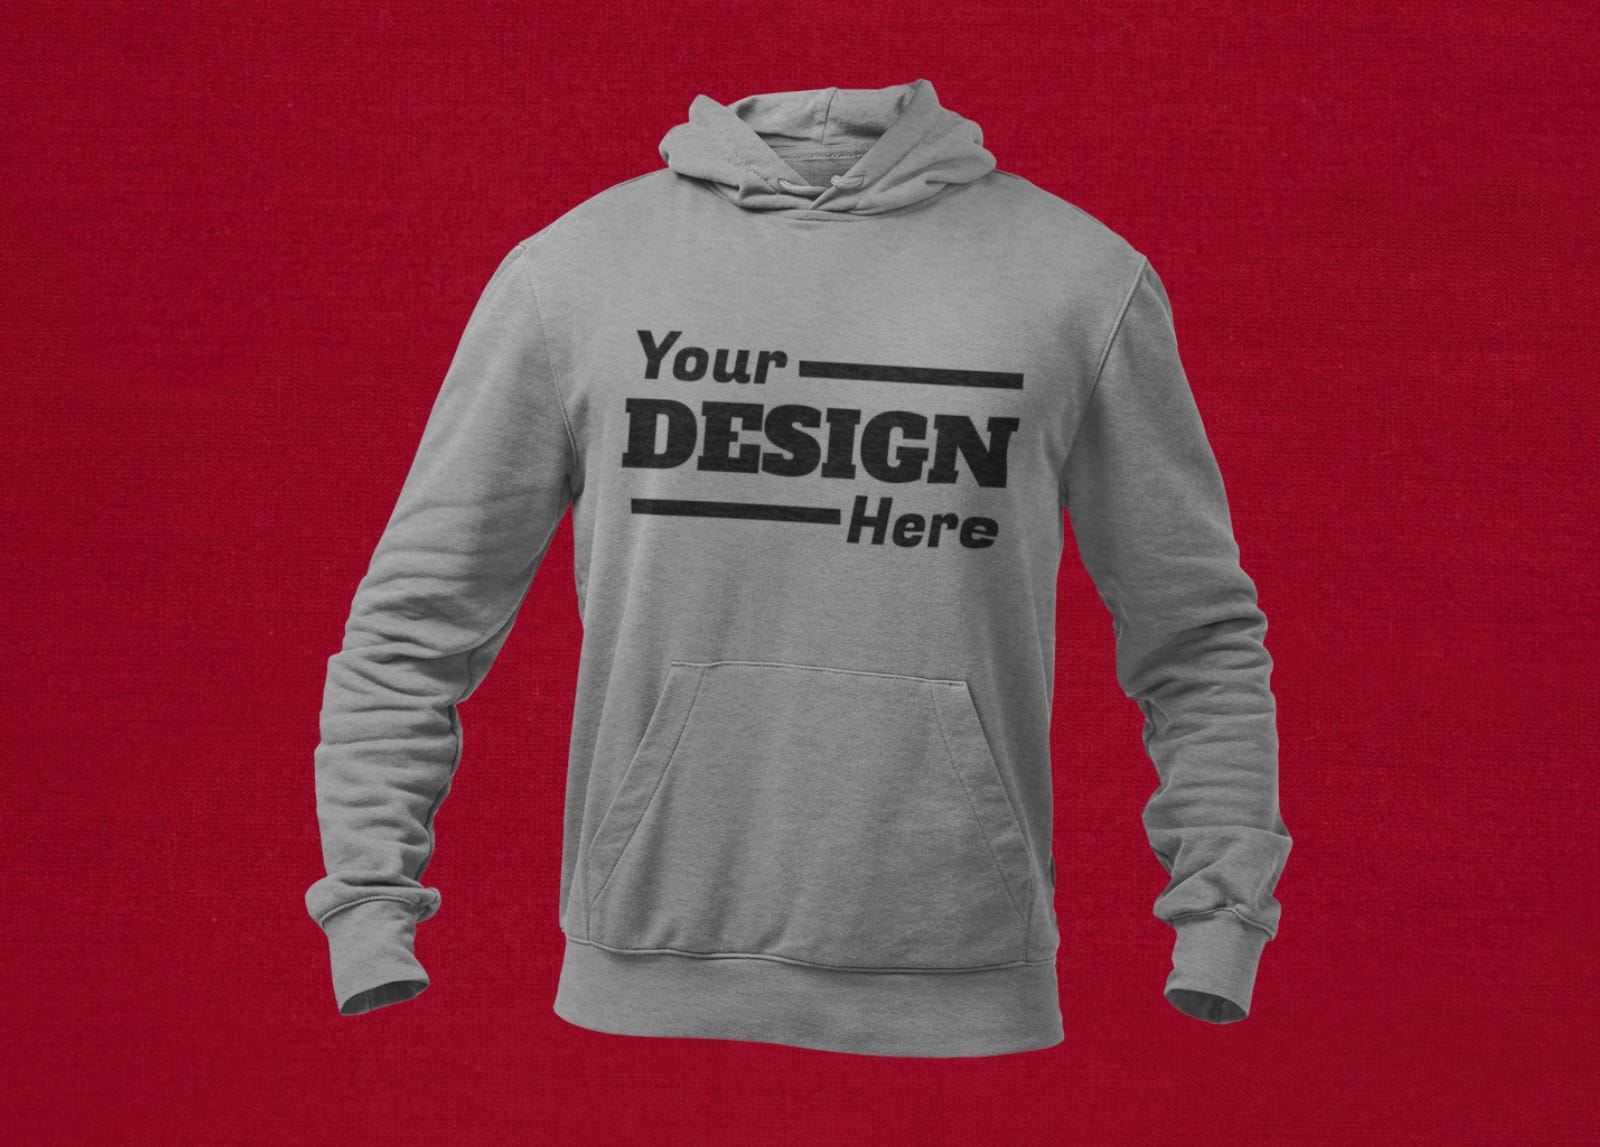 Custom hoodies for men, women, and kids are a great way to showcase your personal style and make a statement. These hoodies can be personalized with your own unique designs, logos, and messages, making them a perfect choice for special events, teams, businesses, or just for everyday wear. Available in a range of colors, styles, and sizes, custom hoodies are comfortable, durable, and offer a practical and fashionable way to keep warm in cooler weather. Whether you're looking to create a personalized gift or outfit for yourself, custom hoodies are an excellent choice.